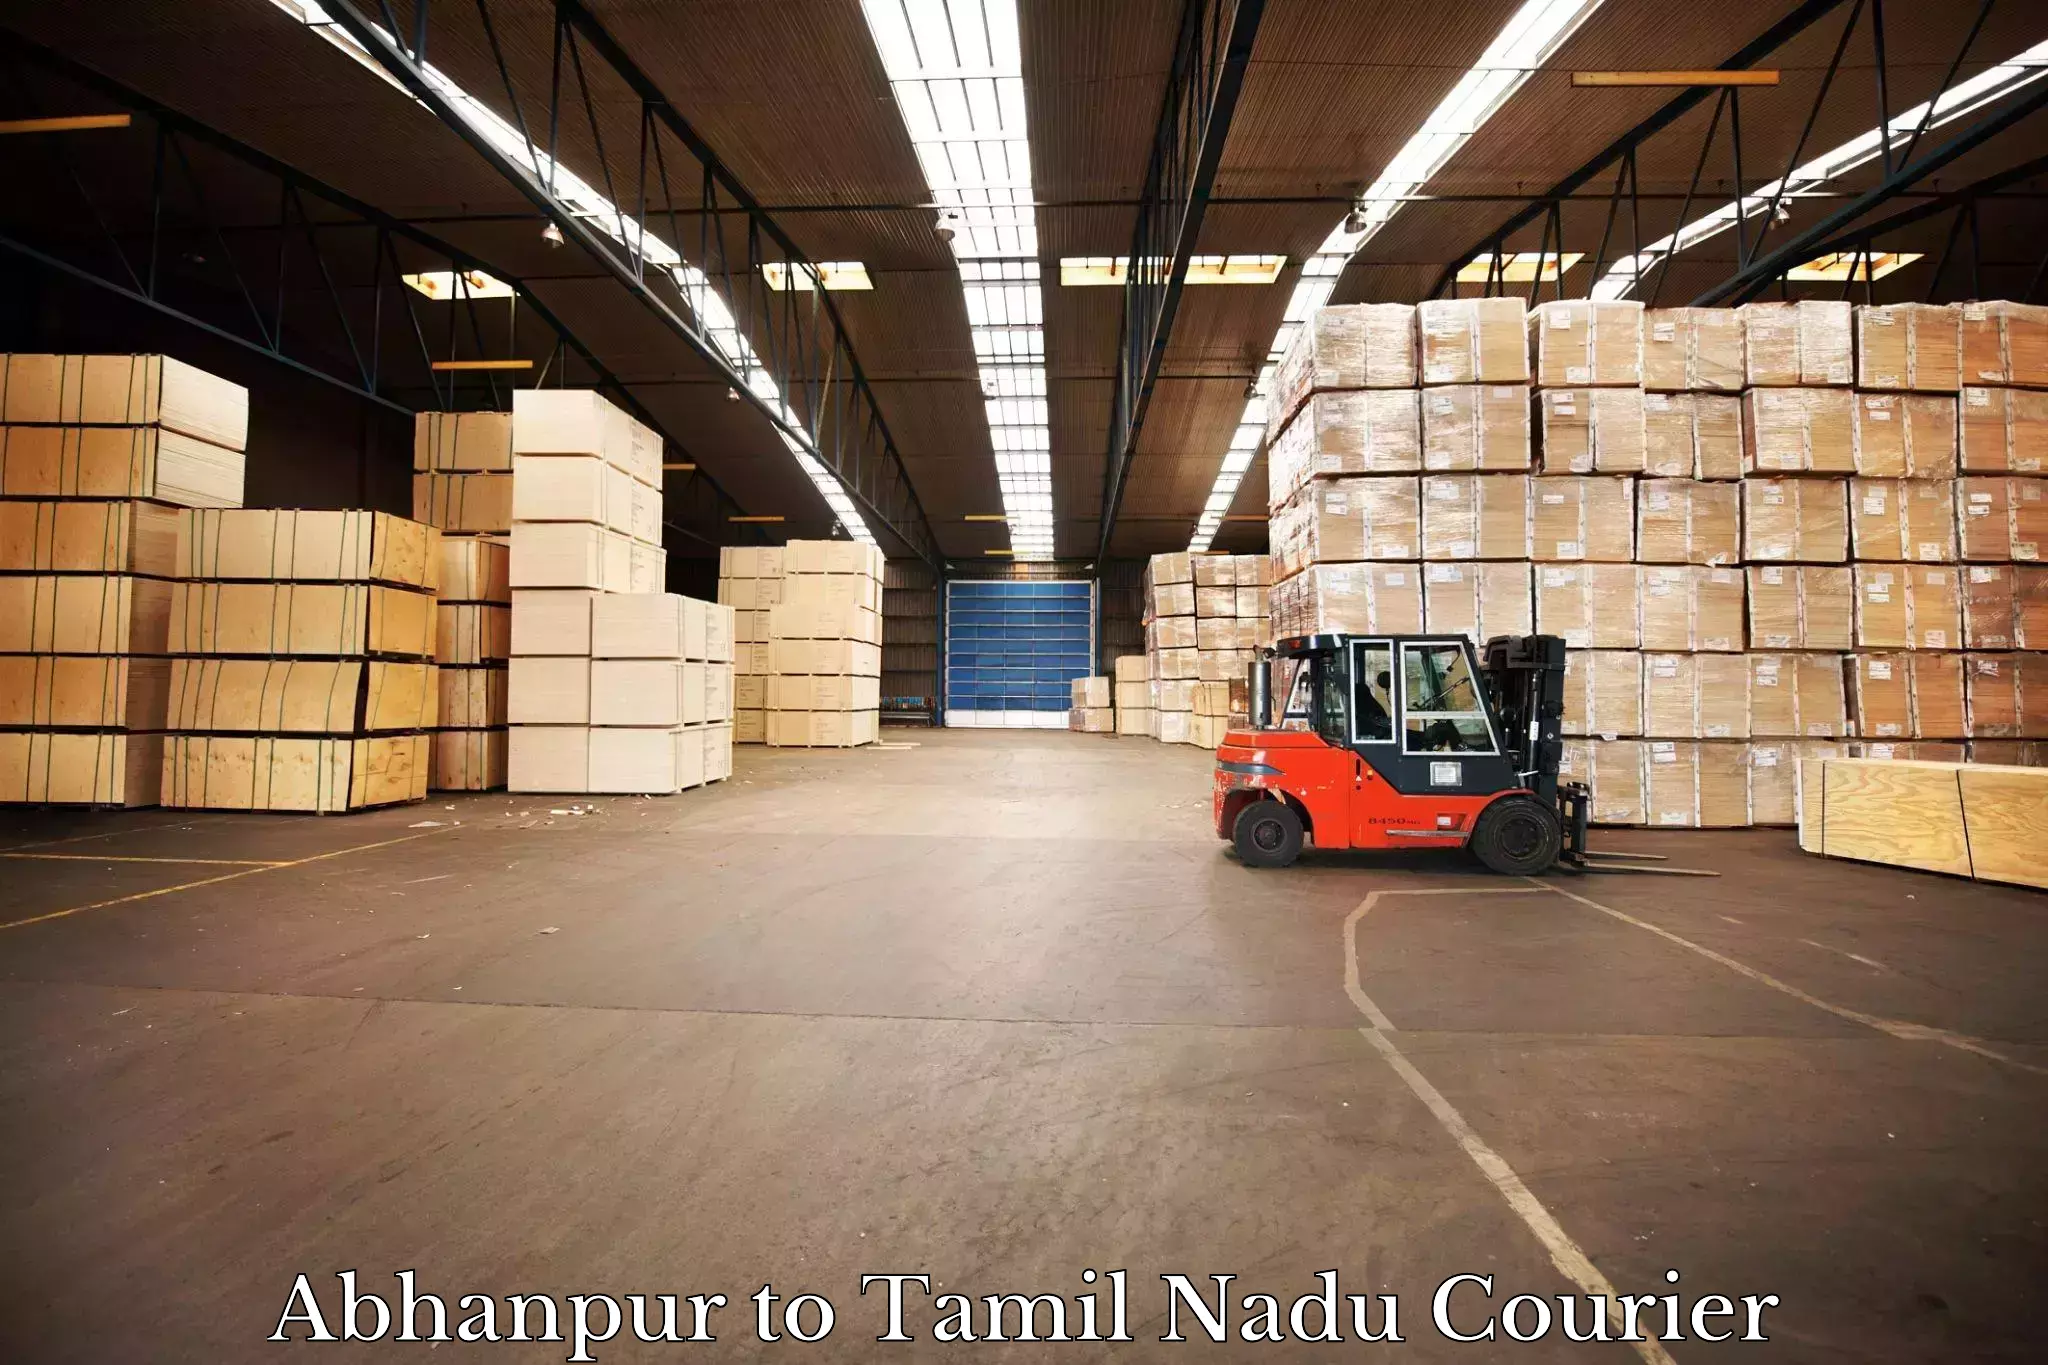 Nationwide shipping coverage Abhanpur to Cuddalore